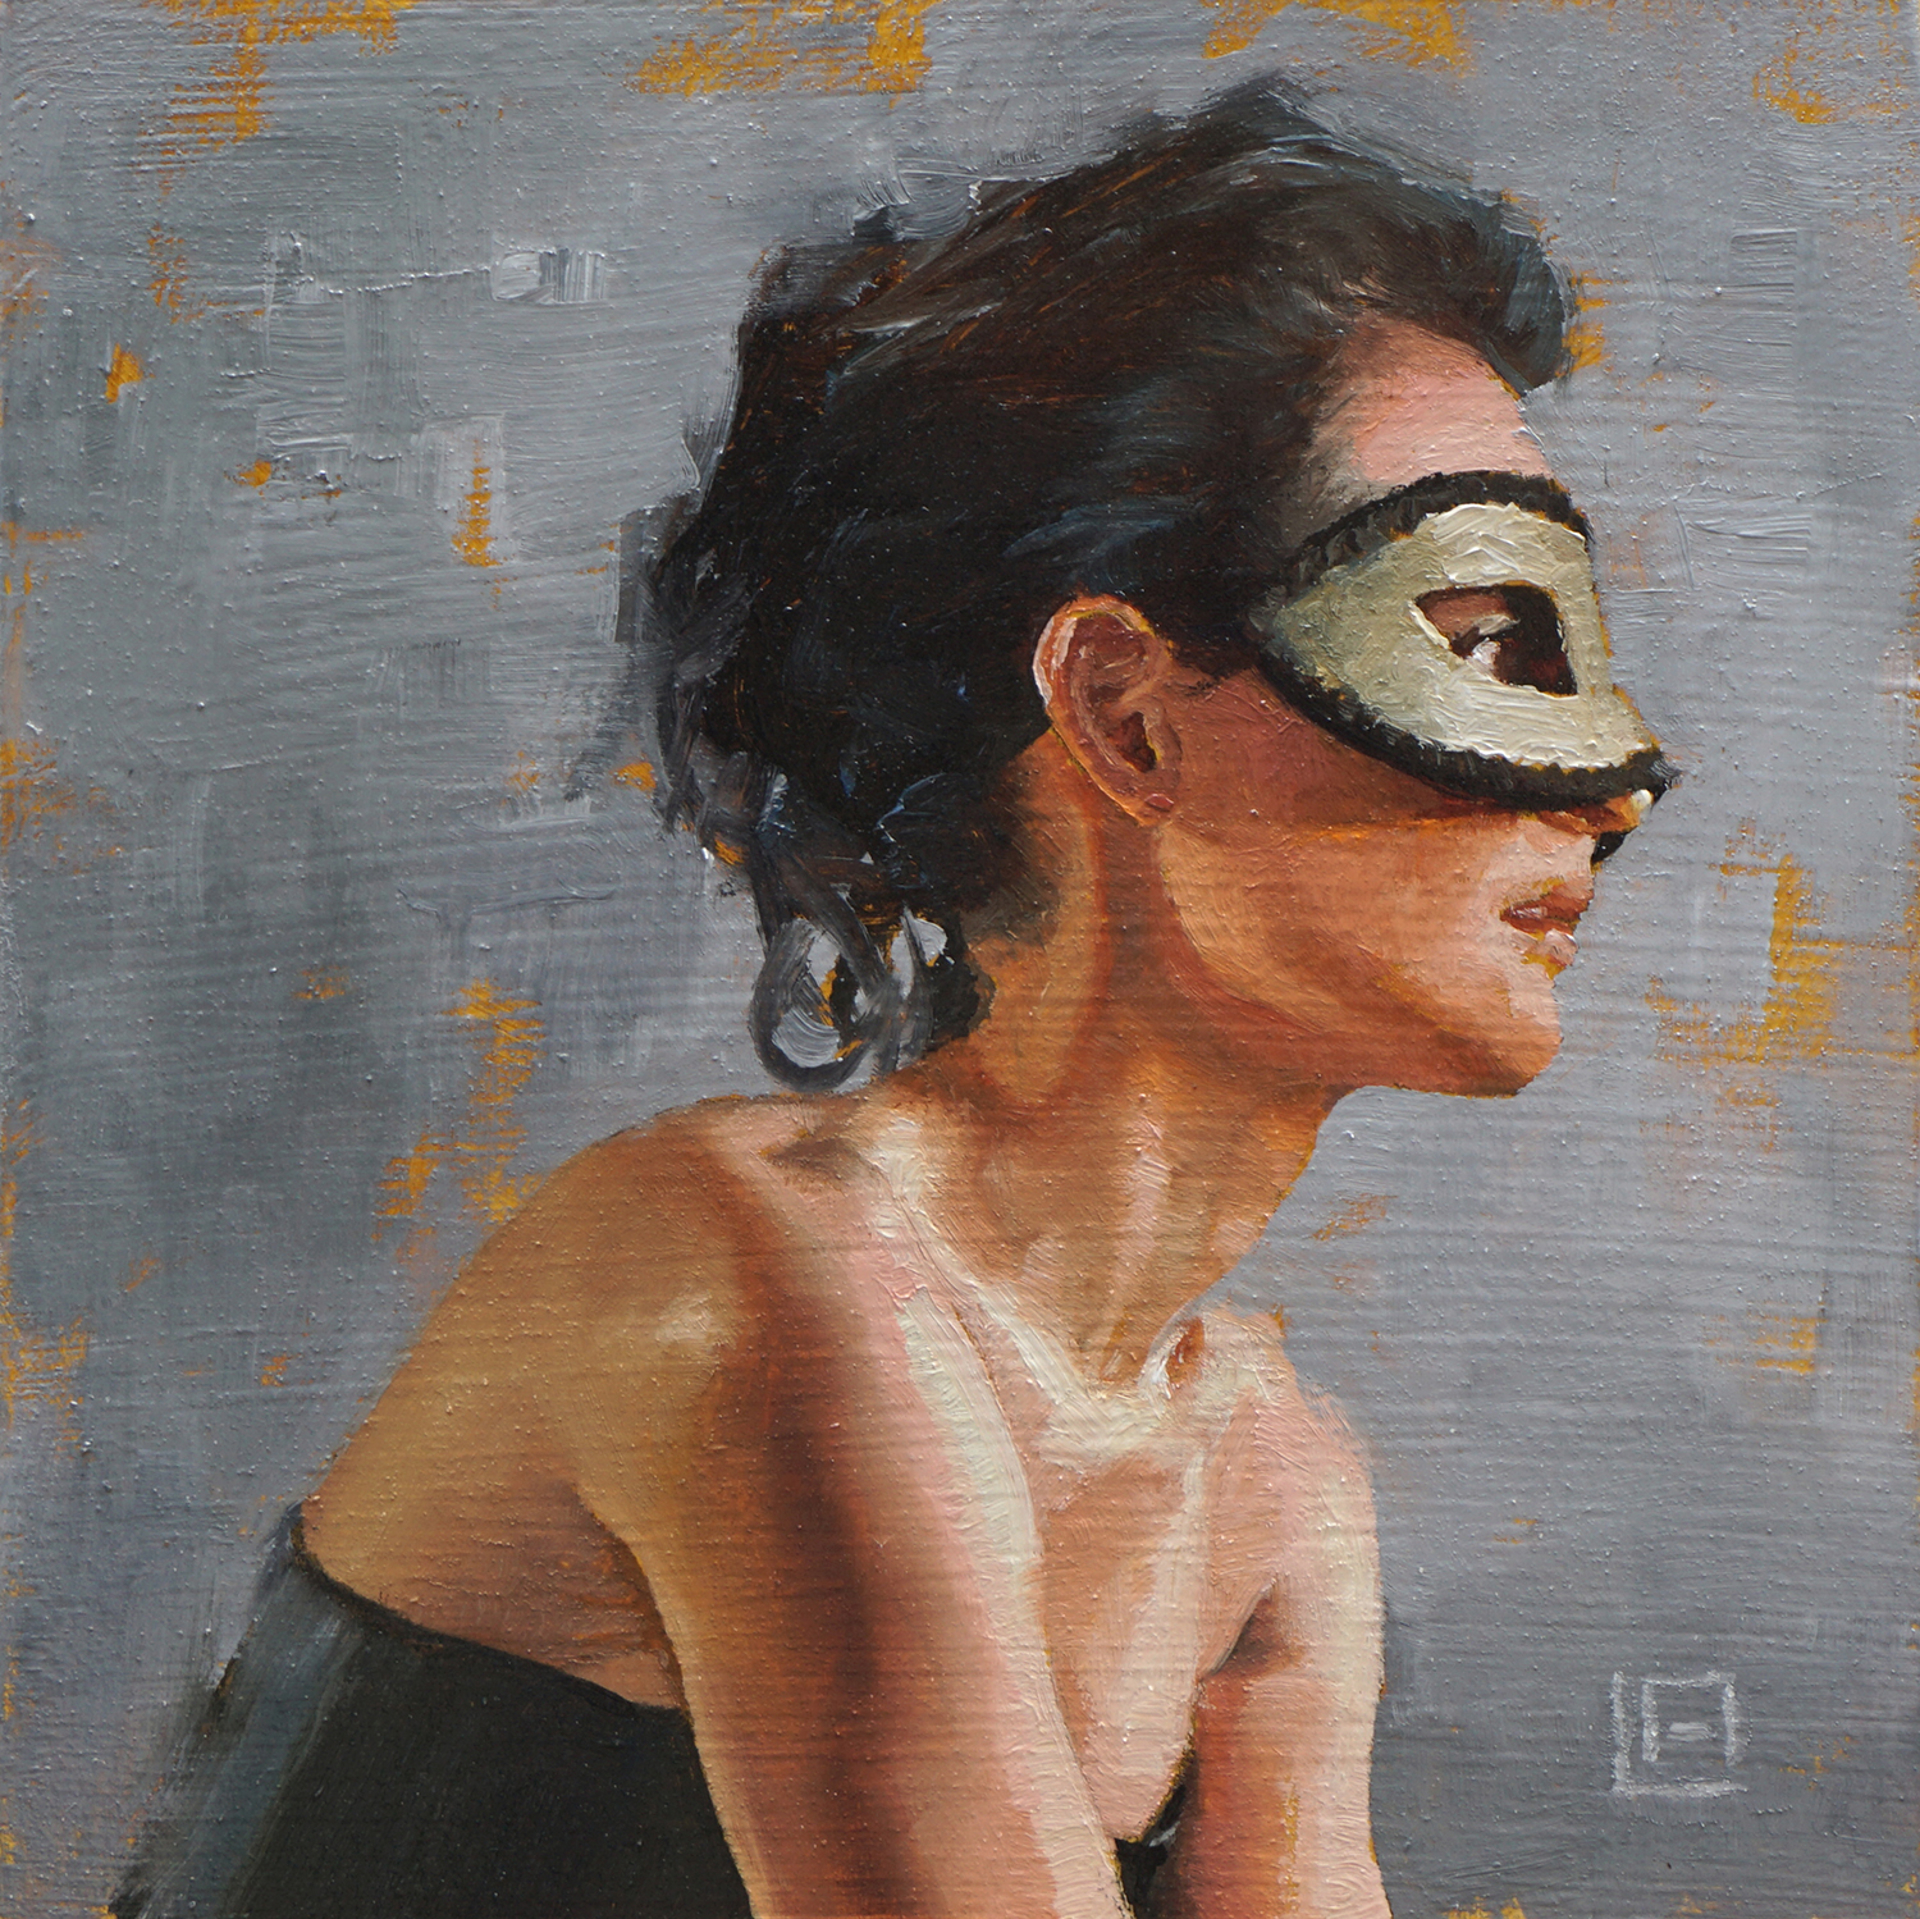 Lady with Mask by Linda Adair